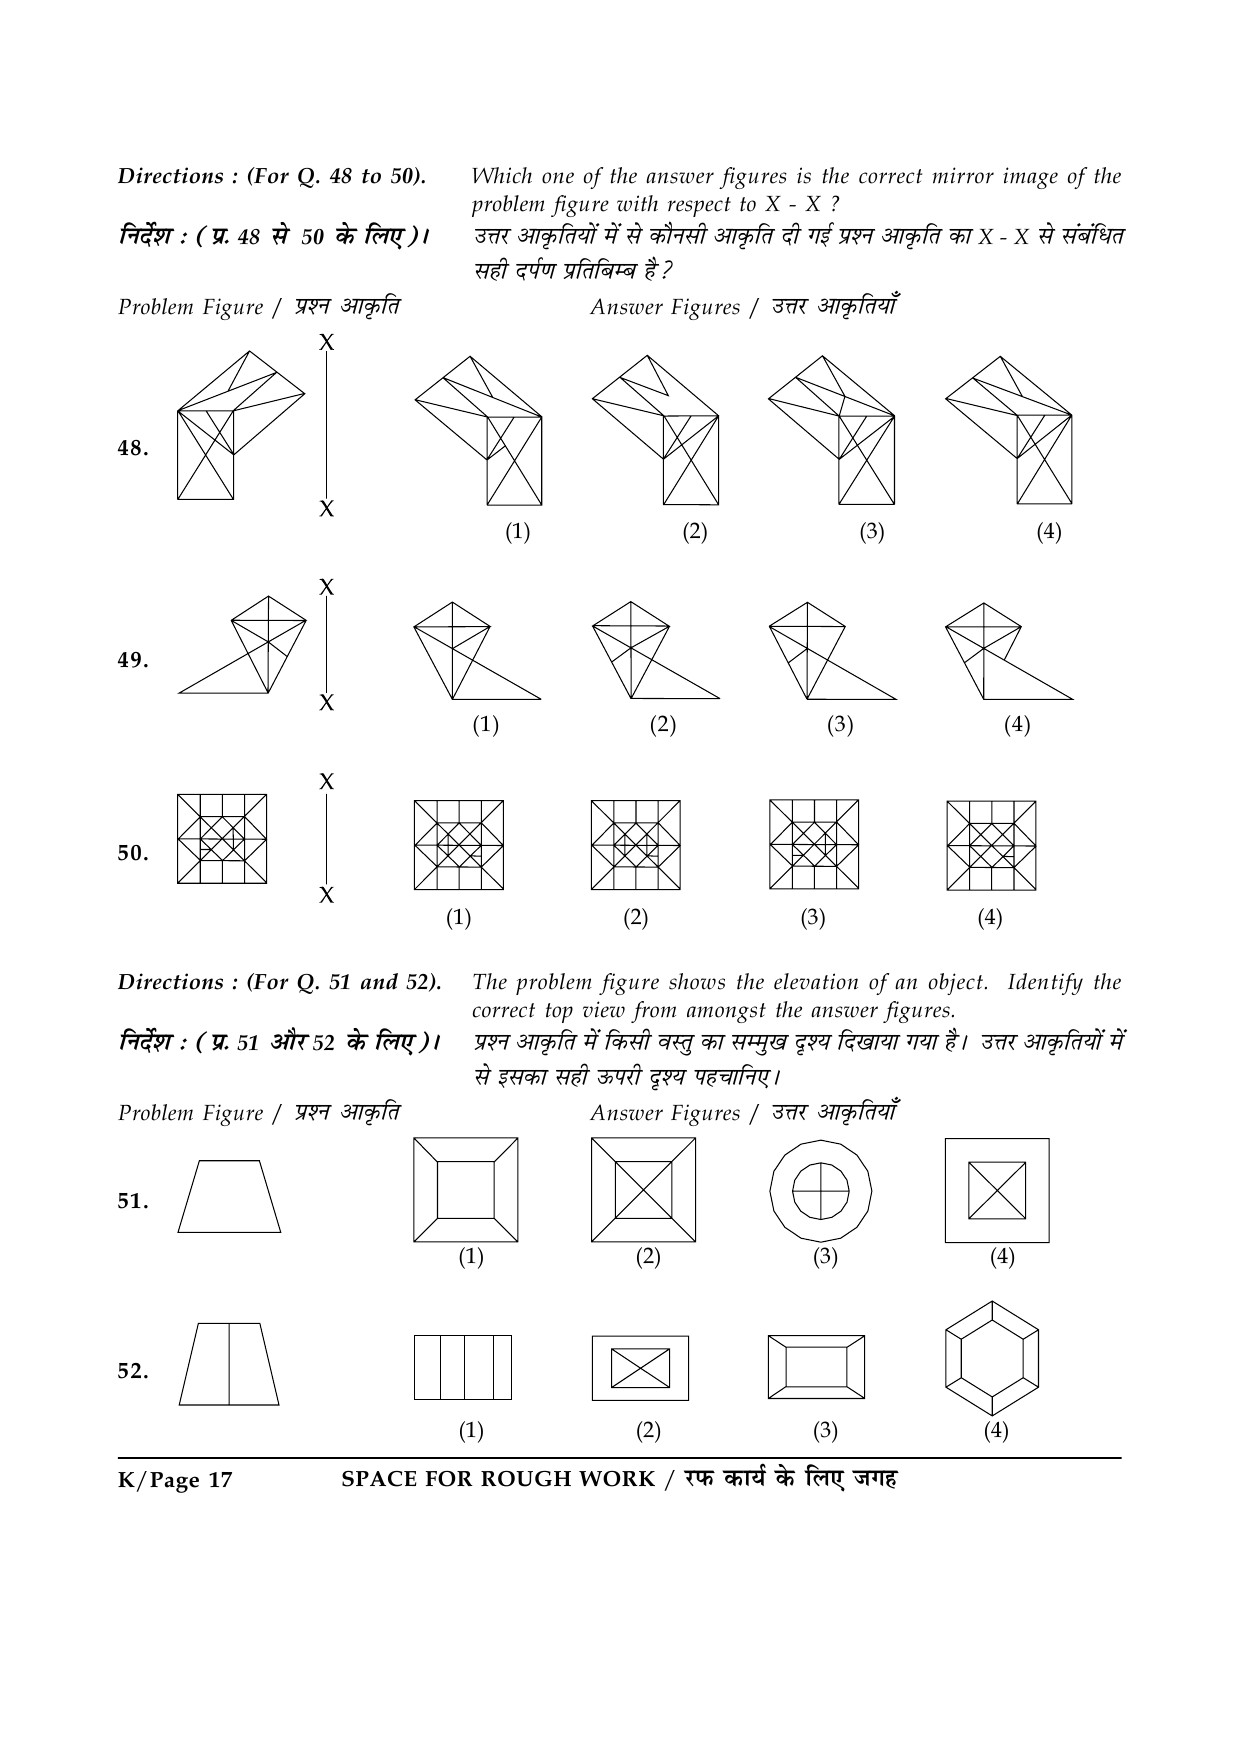 JEE Main Exam Question Paper 2015 Booklet K 17